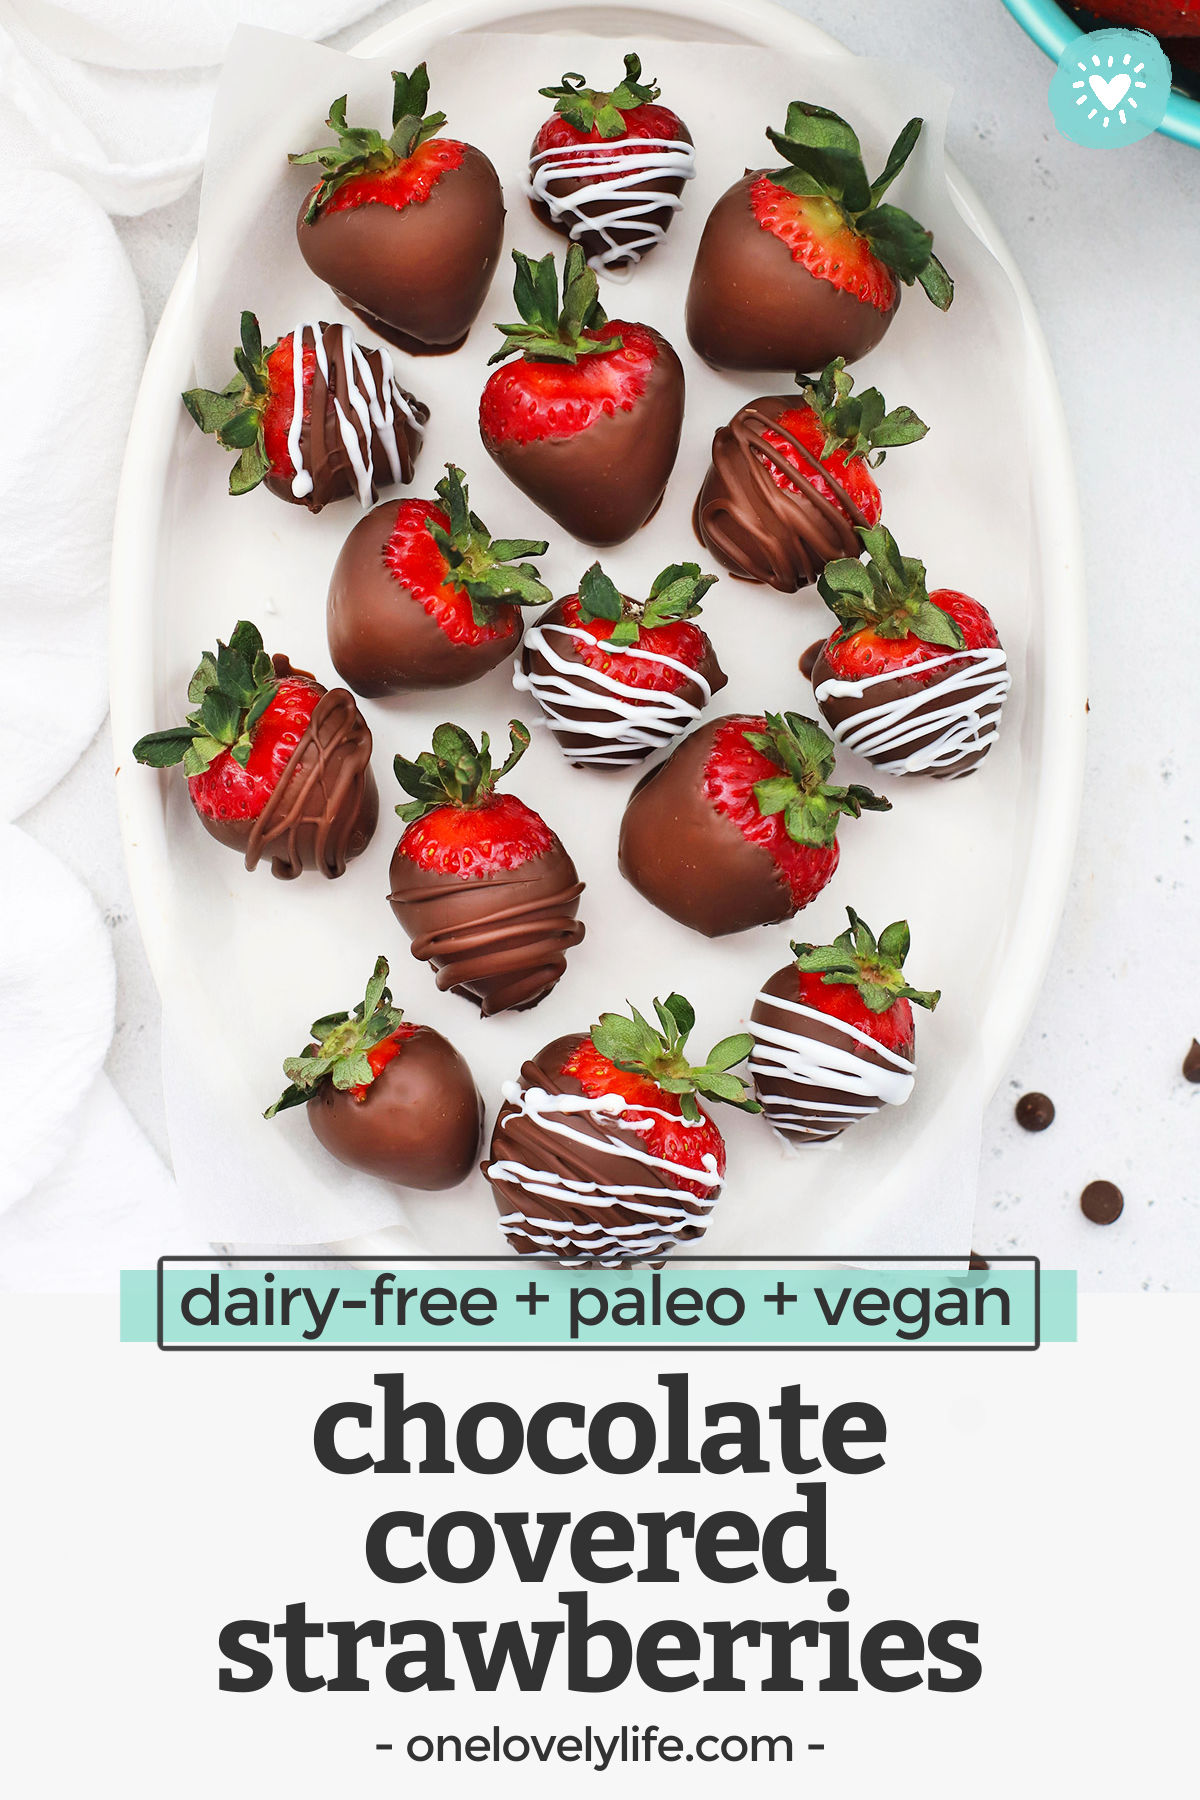 How to Make Chocolate Covered Strawberries - Here is everything you need to know to make this classic dessert! I'll even show you how to make them dairy-free, vegan, and paleo-approved! // Paleo Chocolate covered strawberries // dairy-free chocolate-covered strawberries // vegan chocolate covered strawberries // valentines day dessert #glutenfree #paleo #vegan #dairyfree #chocolatecoveredstrawberries